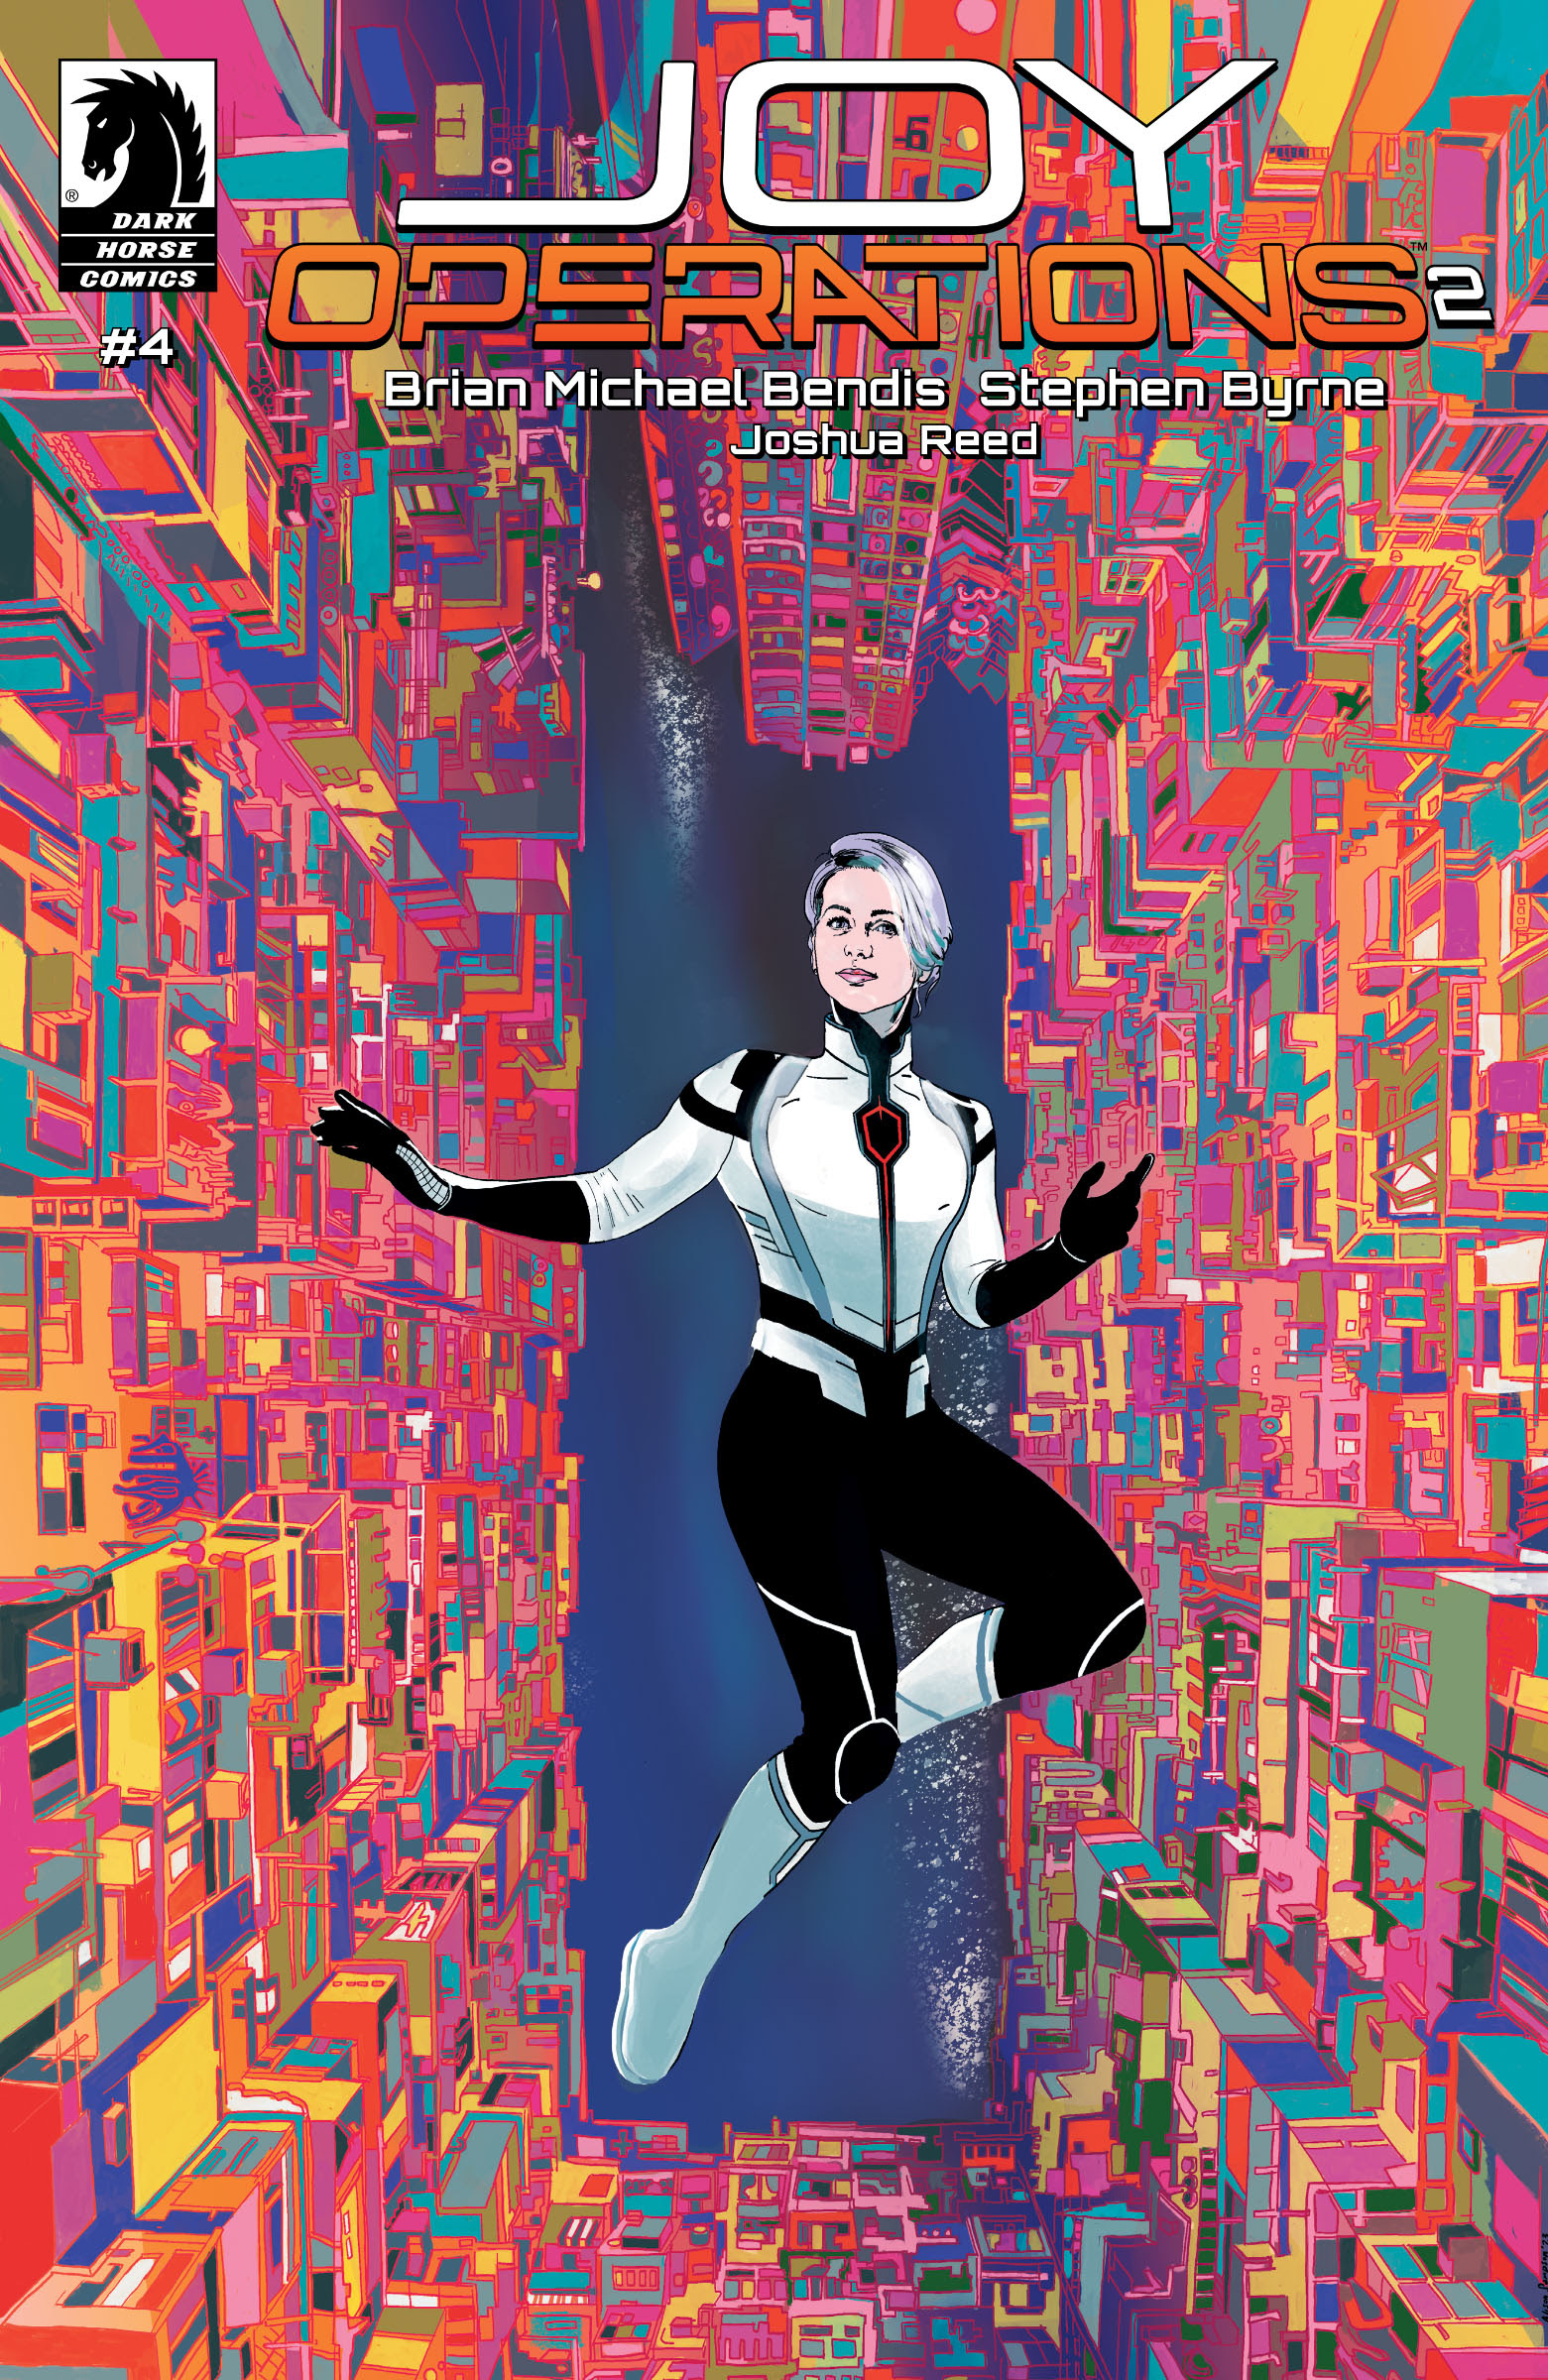 Joy Operations ll #4 Variant by Alison Sampson 